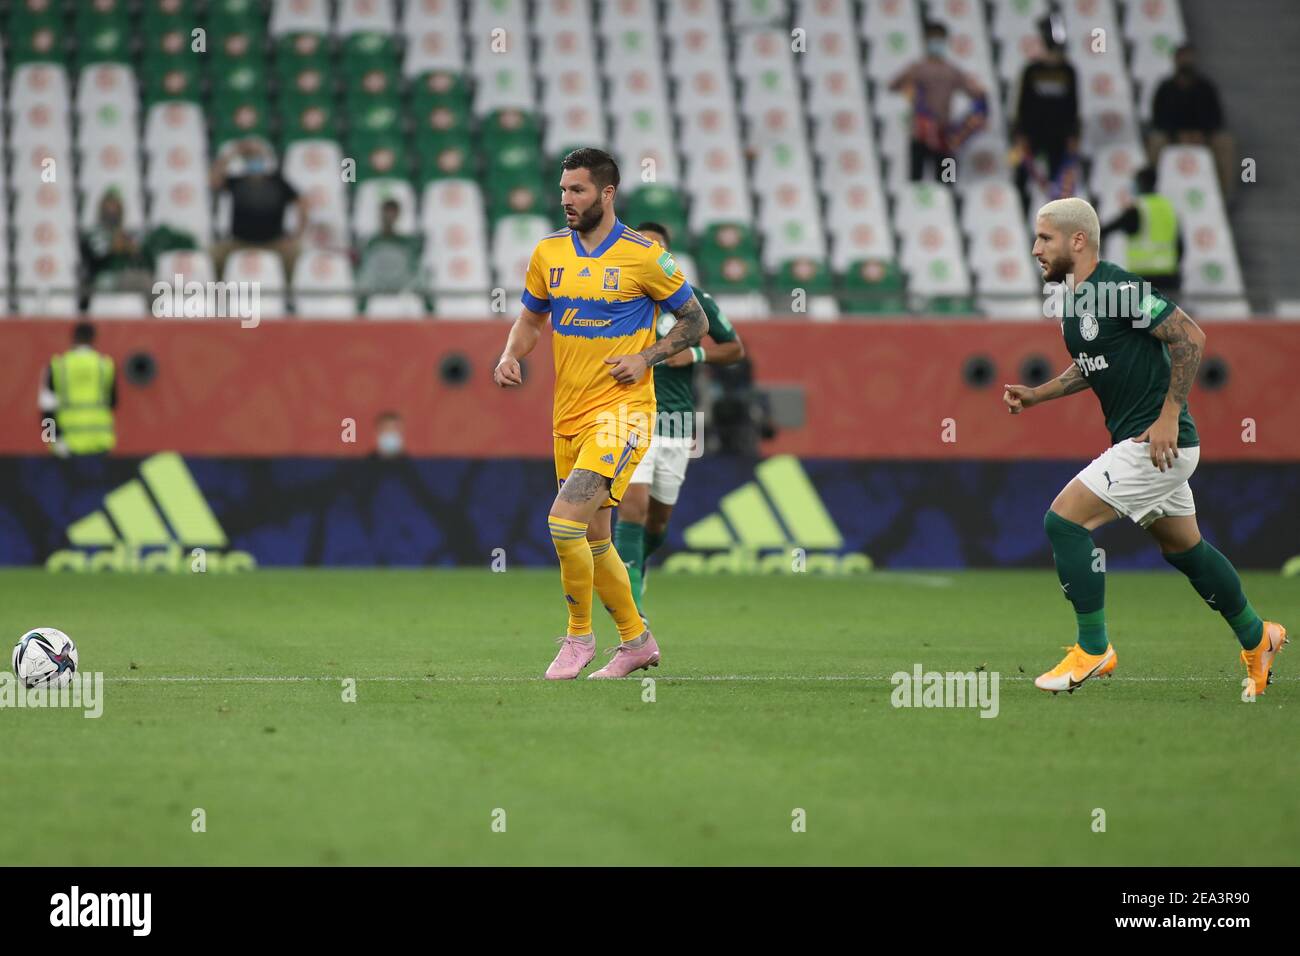 DOHA, QATAR - FEBRUARY 07: André-Pierre Gignac of Tigres UANL and Zé Rafael of Palmeiras during the semi-final match between Palmeiras and Tigres UANL at Education City Stadium on February 7, 2021 in Doha, Qatar. (Photo by Colin McPhedran/MB Media) Stock Photo